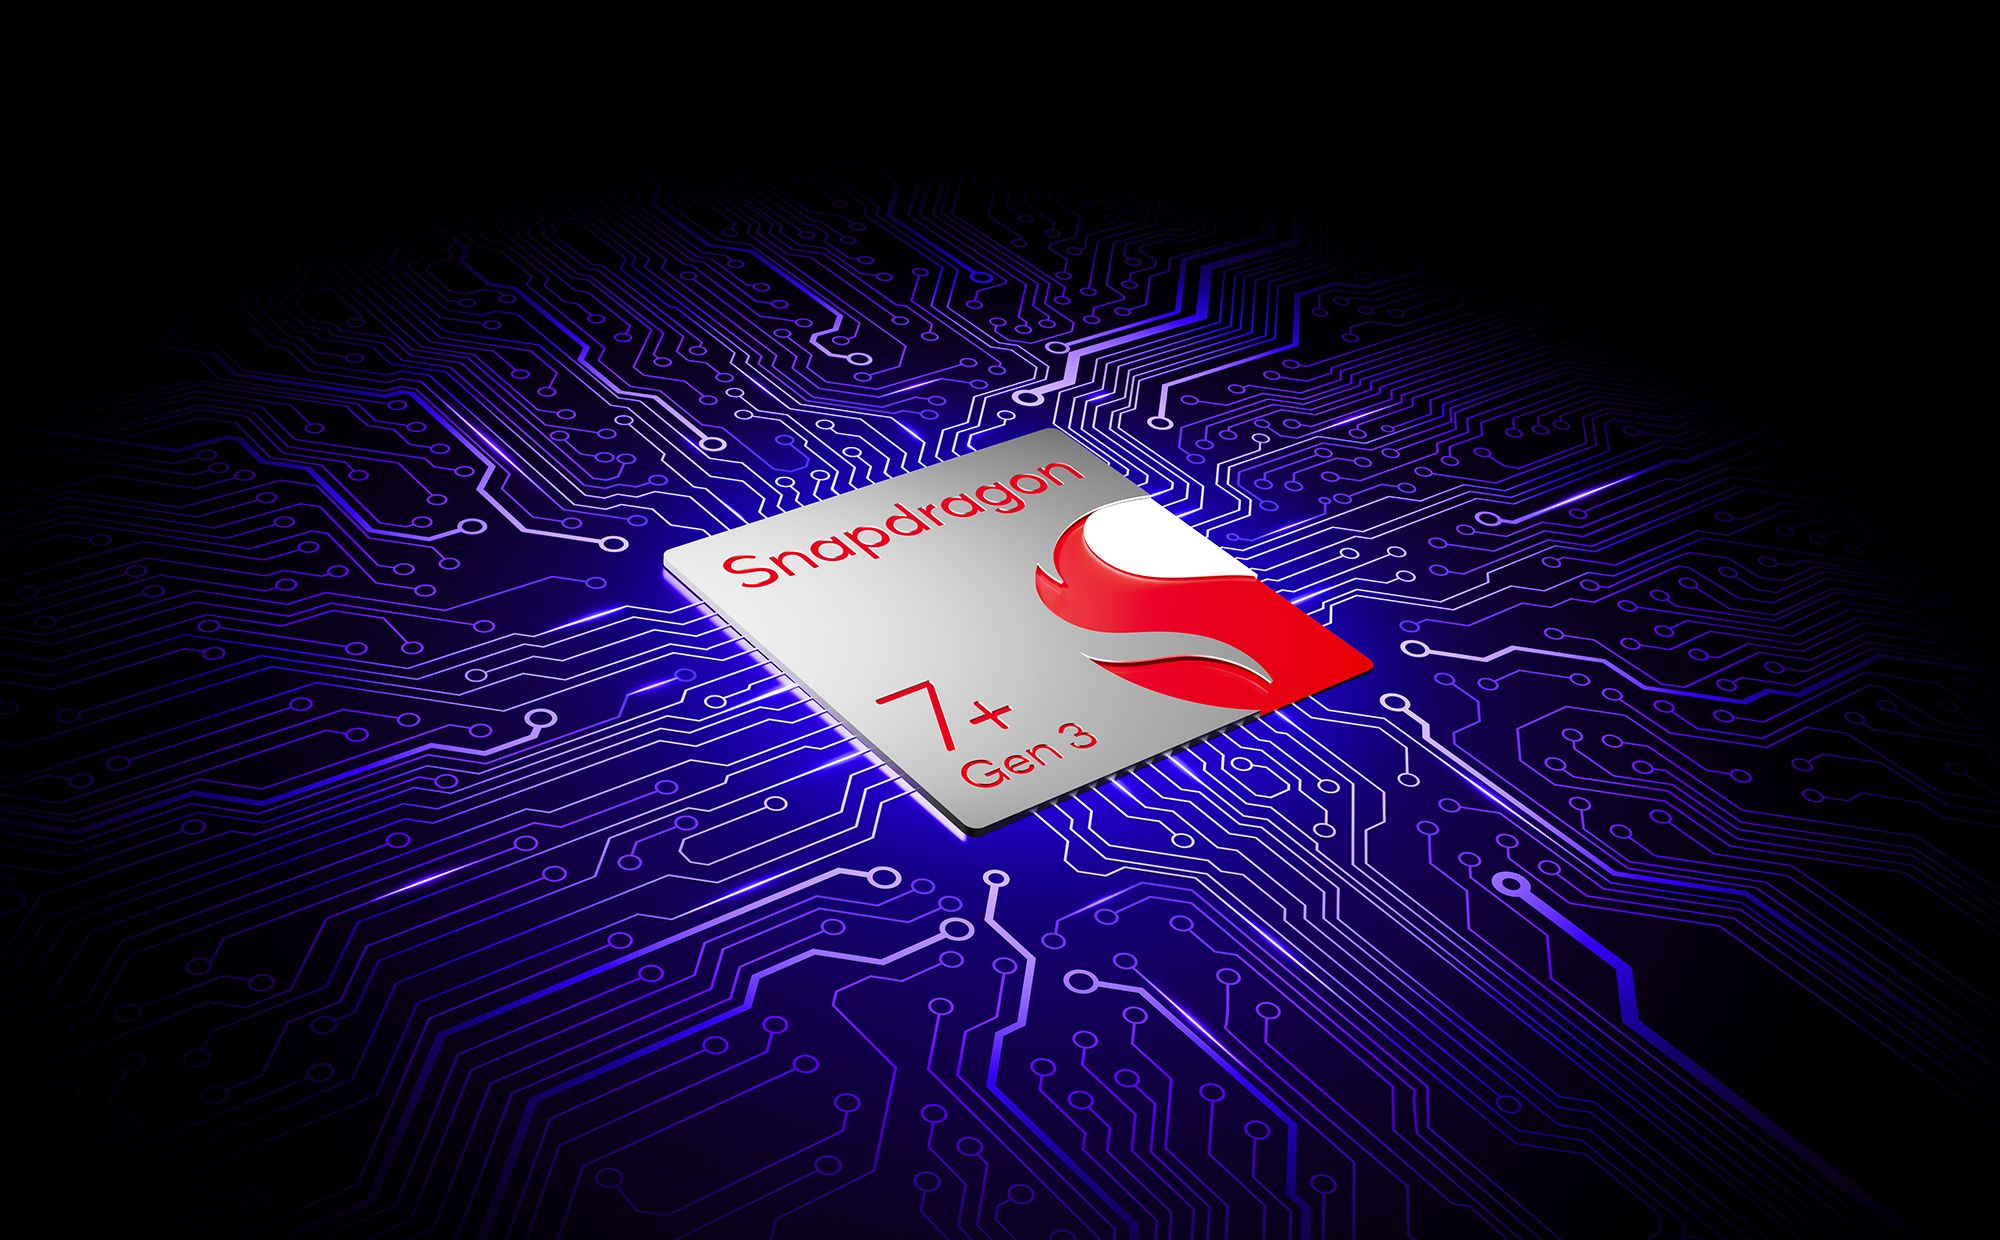 Snapdragon 7+ Gen 3 key visual showing the chipset and logo